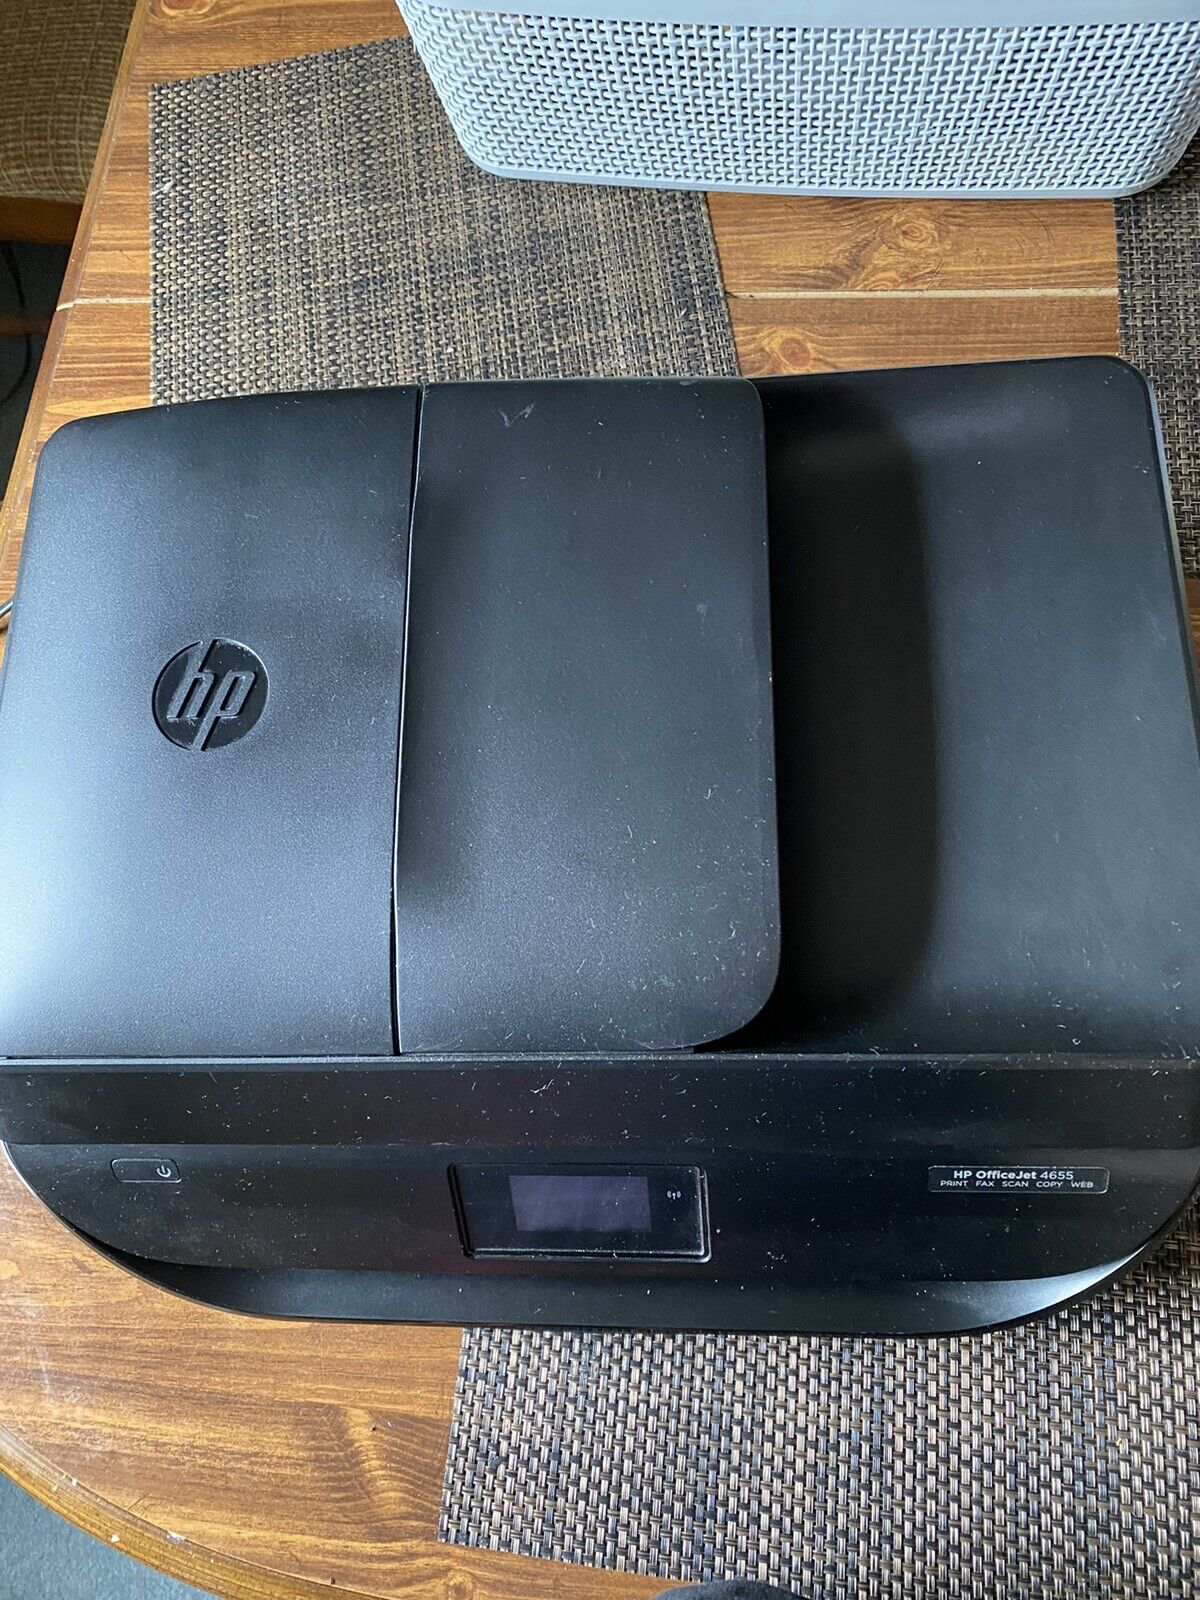 HP OfficeJet Printer Model 4655 All-in-One Copy, Scan Print, Tested New Ink